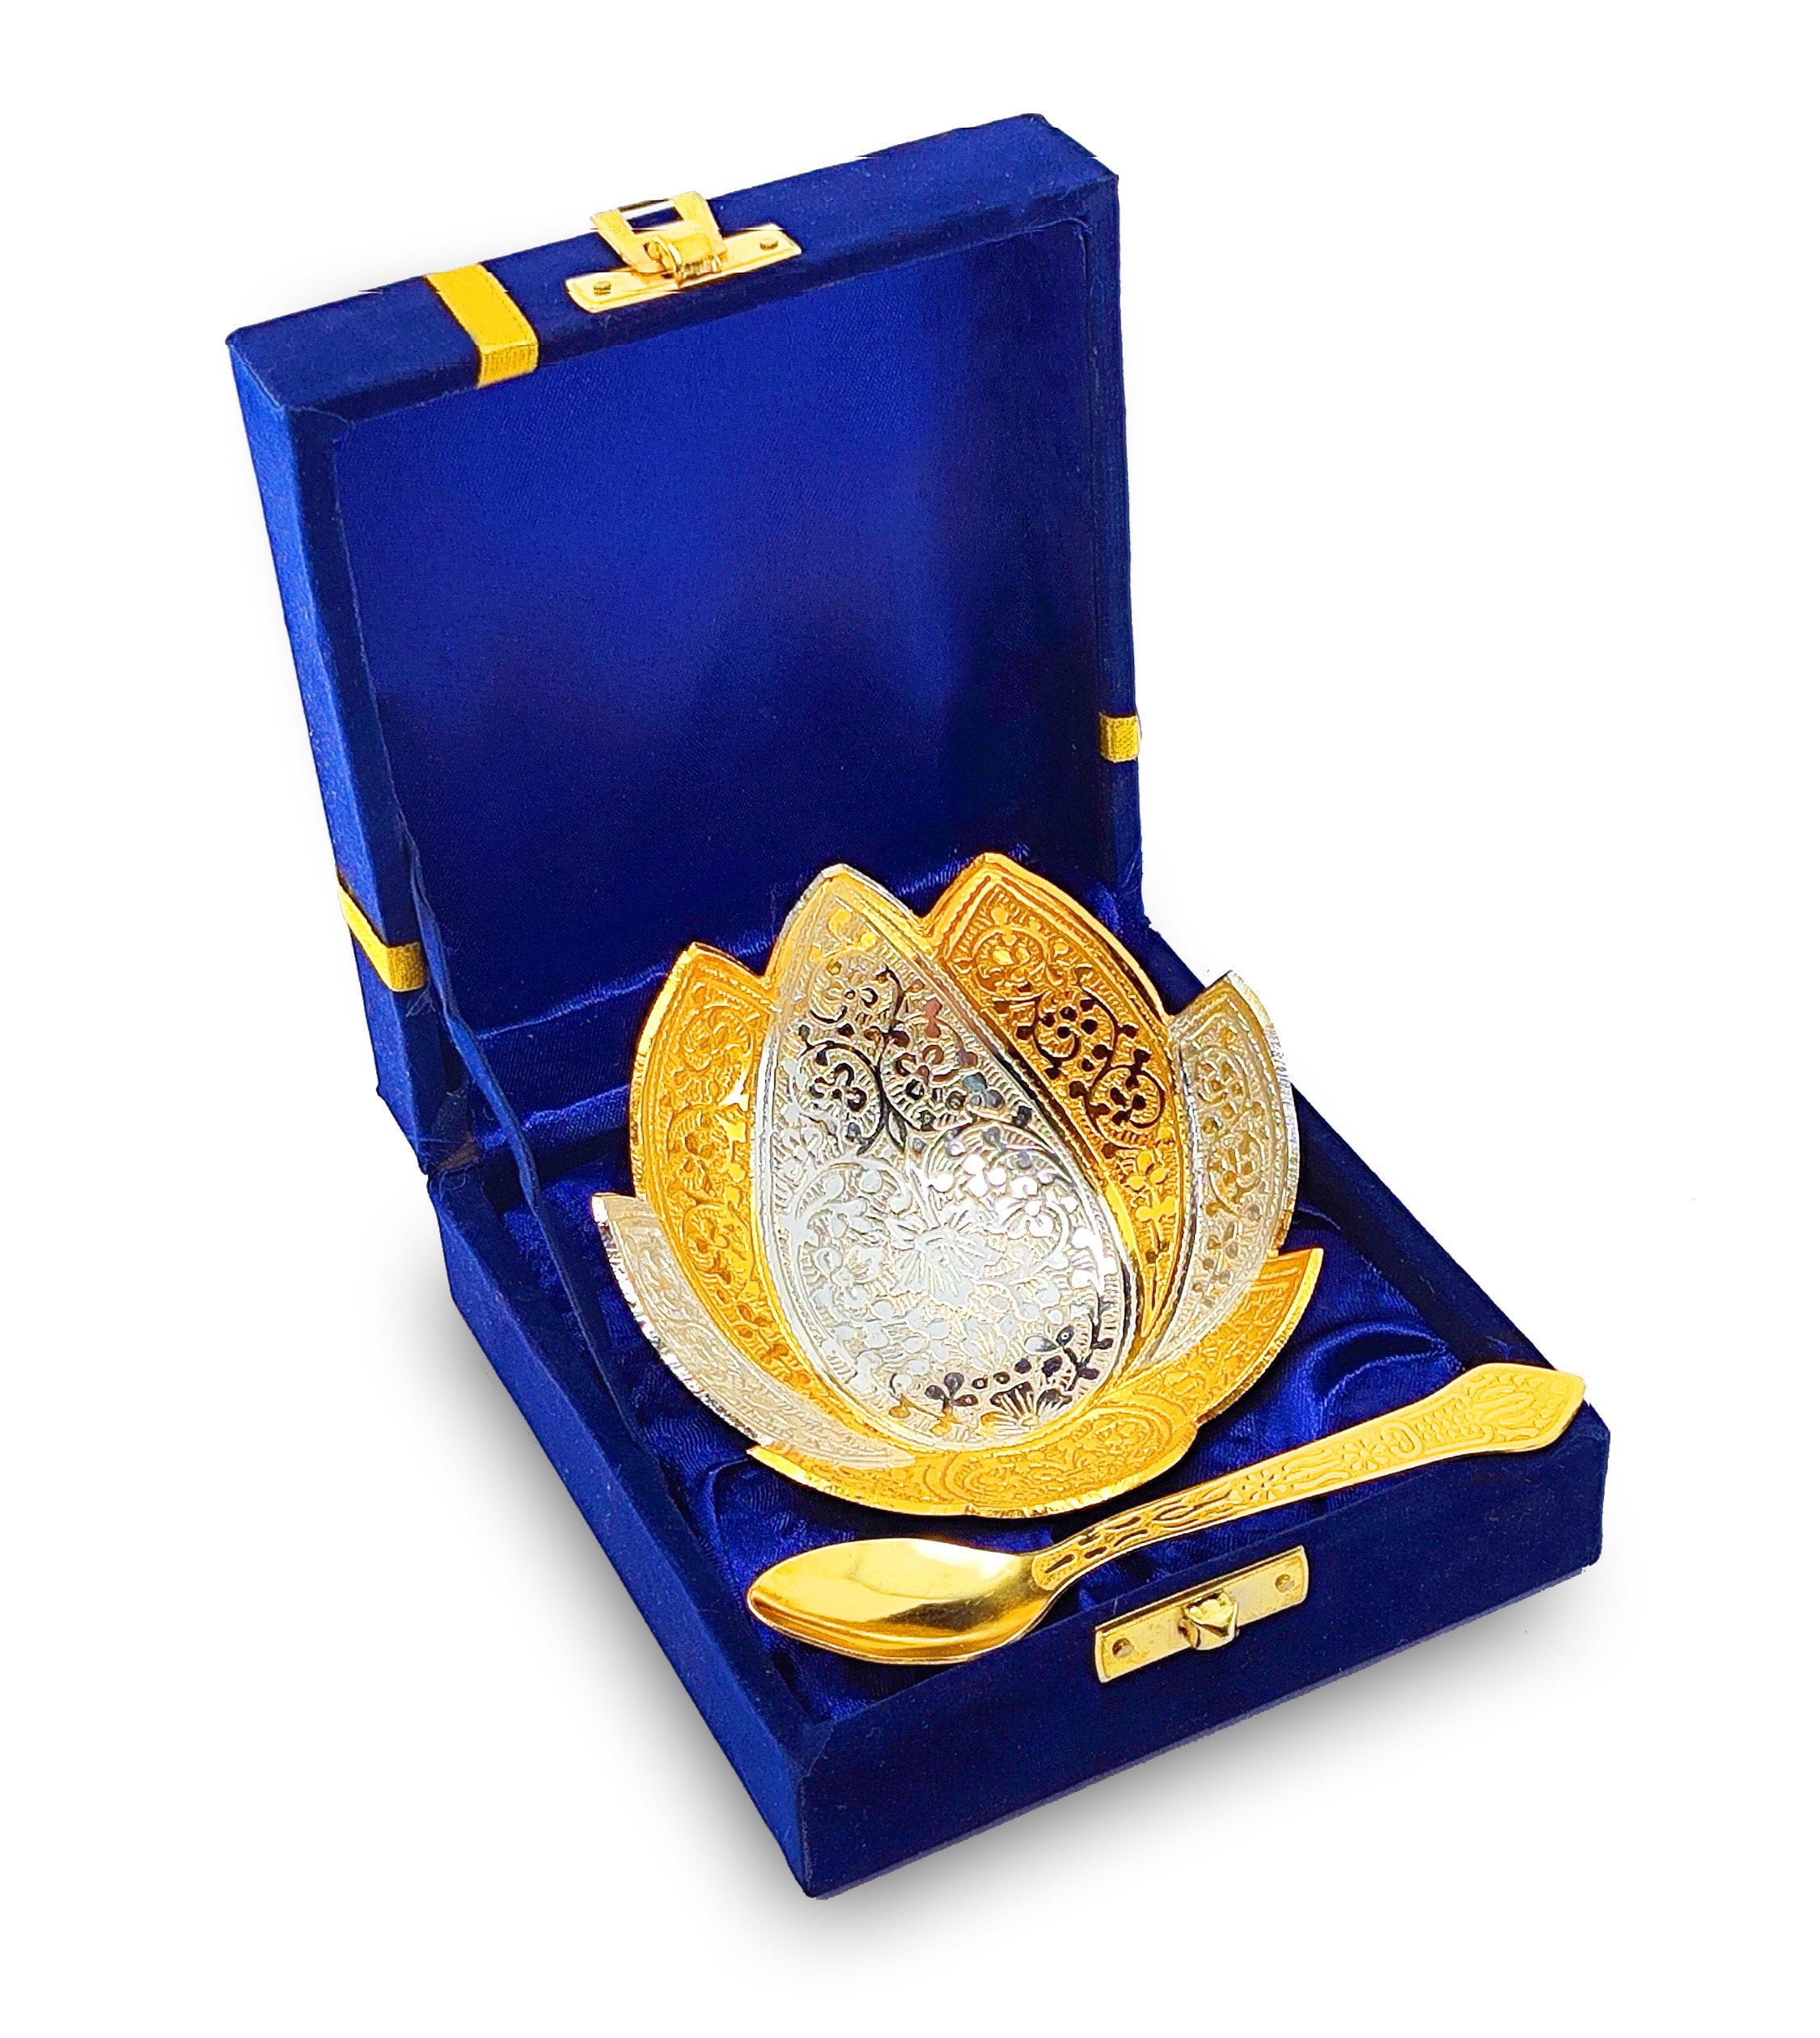 BENGALEN Gold & Silver Plated Bowl Spoon Set